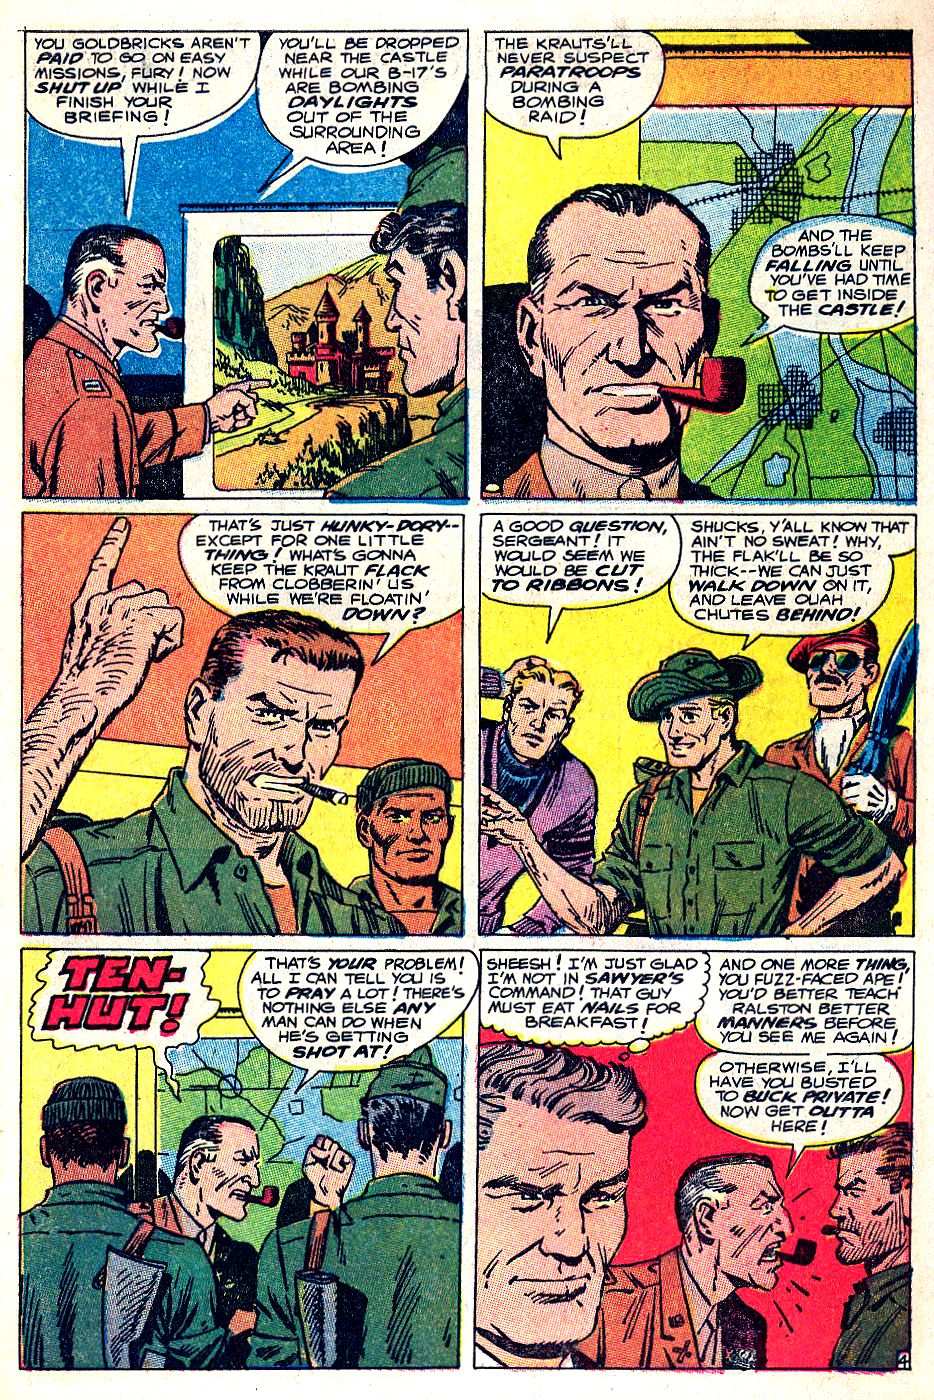 Read online Sgt. Fury comic -  Issue #53 - 7